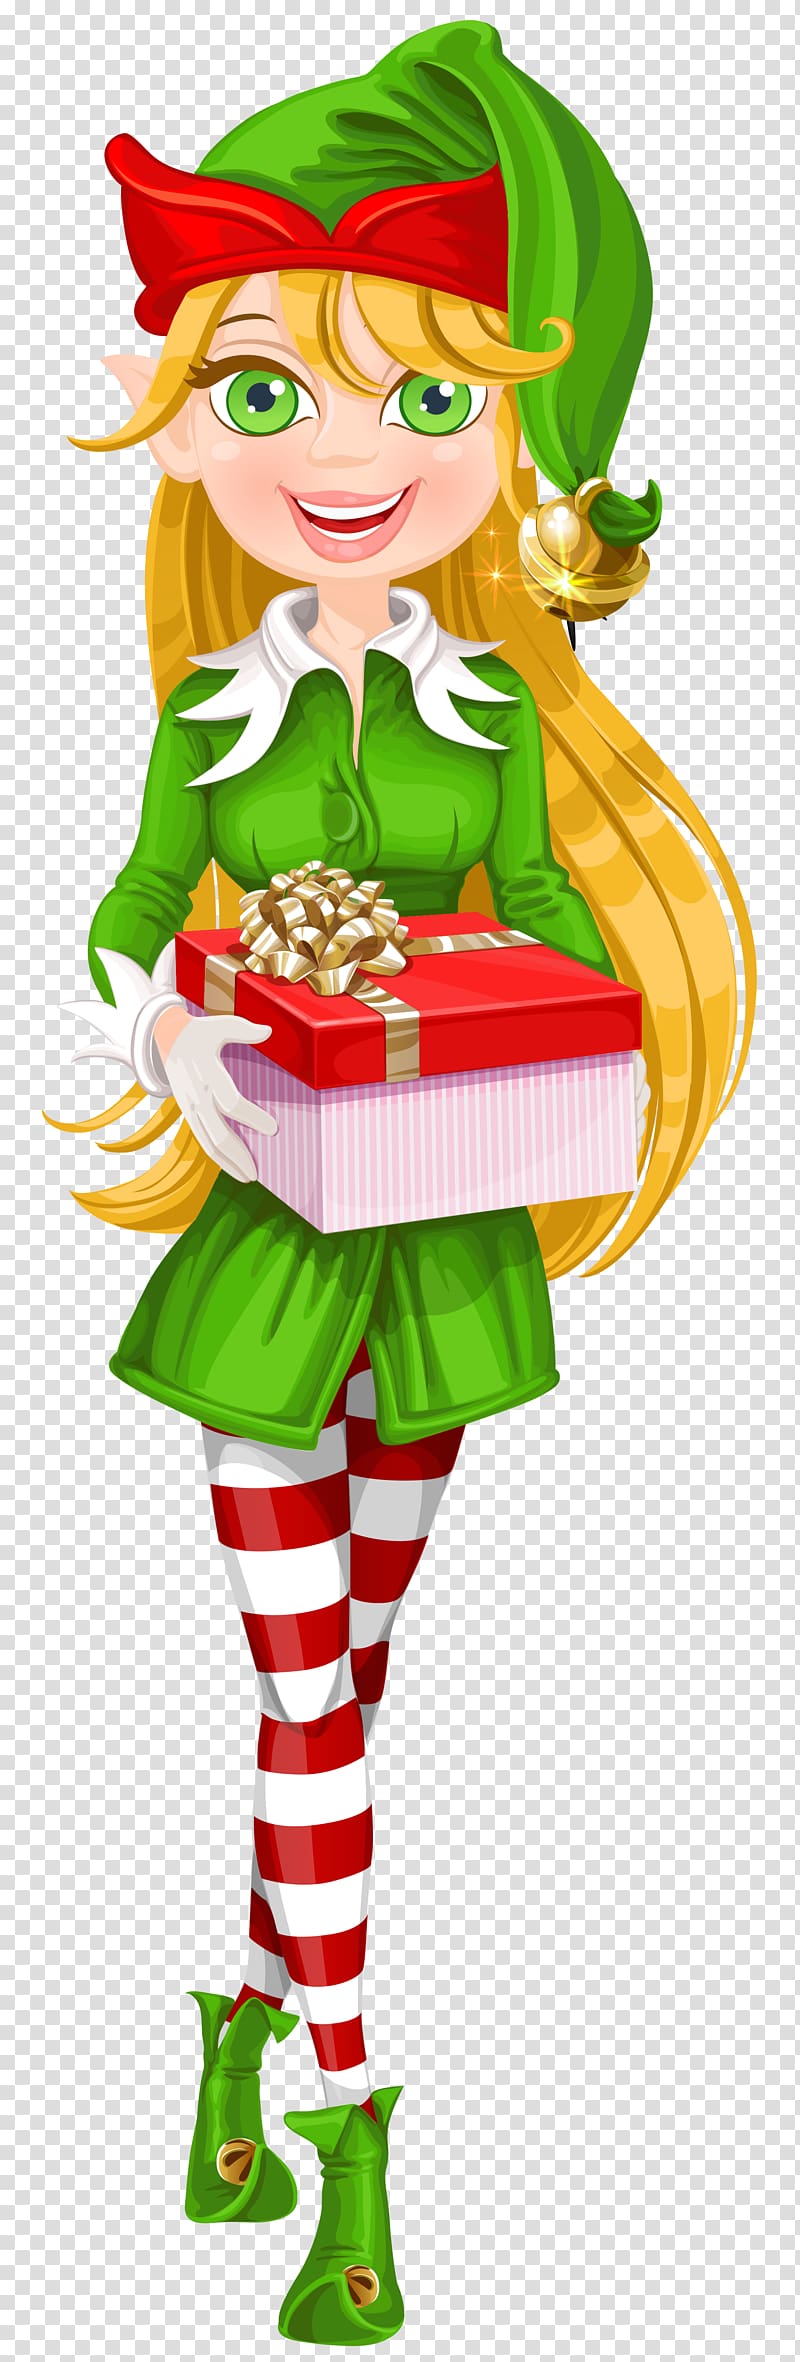 female dwarf holding gift, The Elf on the Shelf Santa Claus Christmas elf , Christmas Elf transparent background PNG clipart